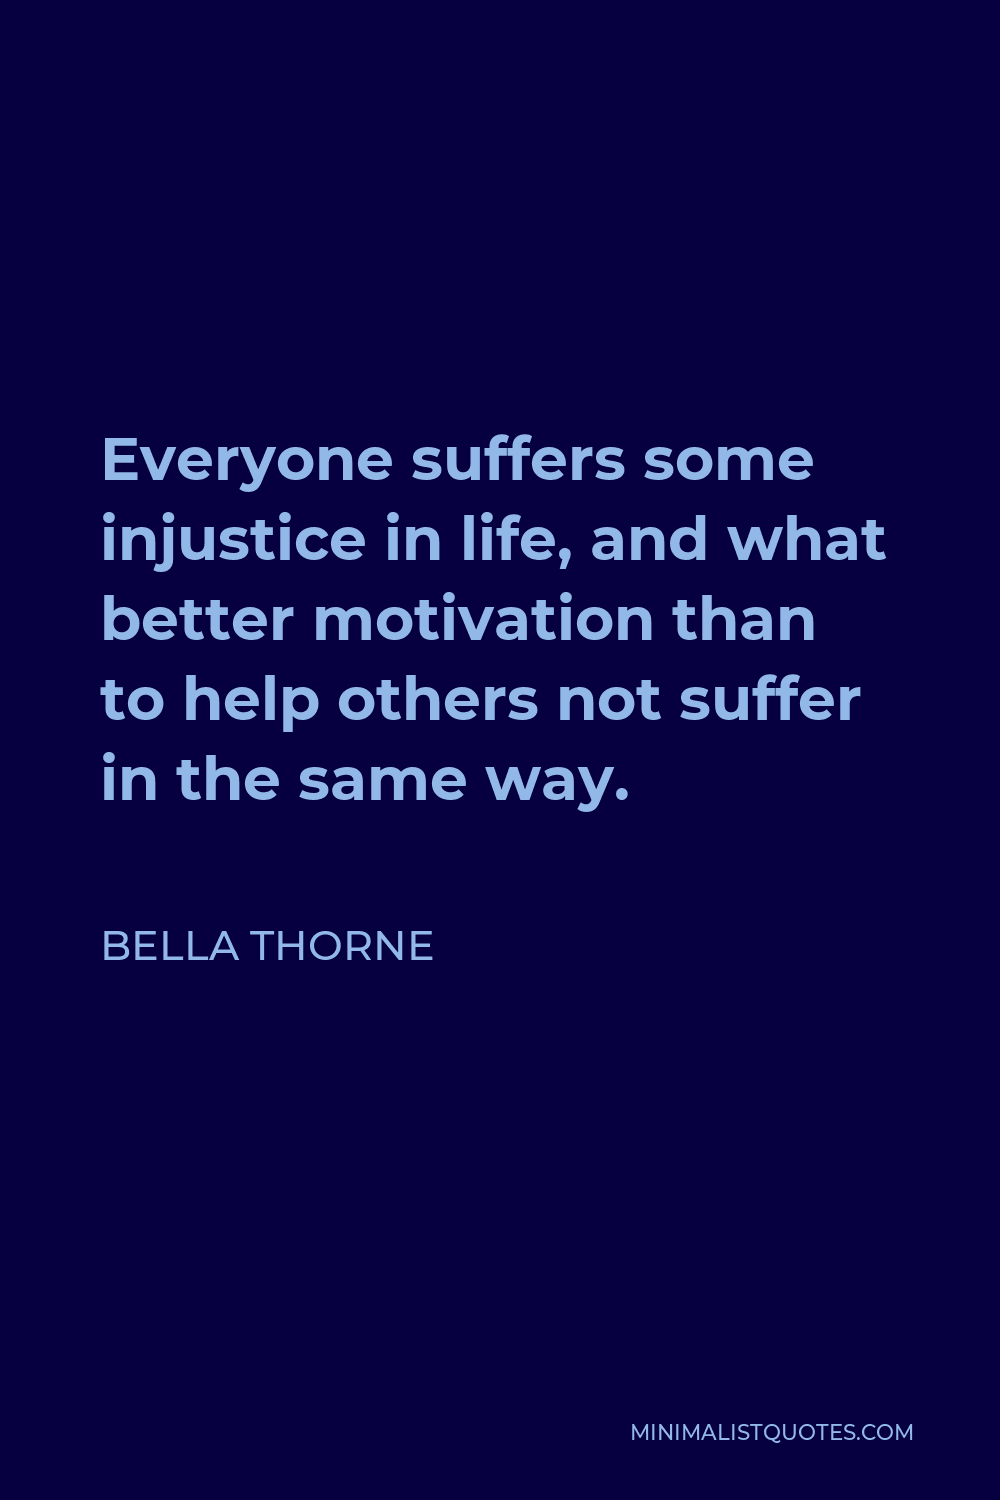 Bella Thorne Quote - Everyone suffers some injustice in life, and what better motivation than to help others not suffer in the same way.